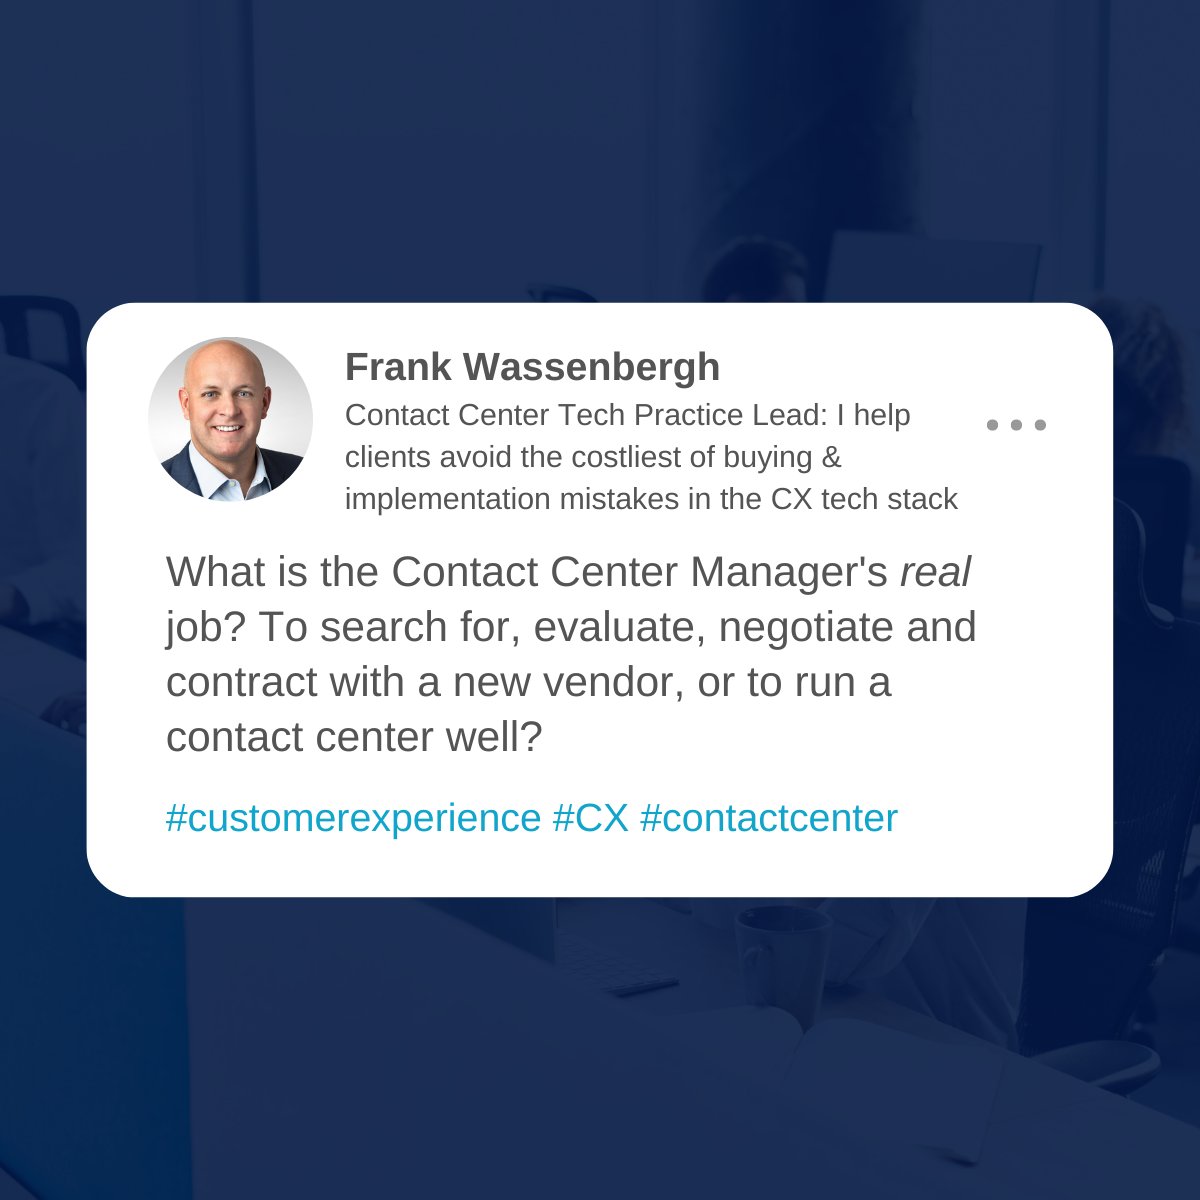 What do you think a Contact Center Manager's real job is? Leave your thoughts in the comments.

#customerexperience #CX #contactcenter